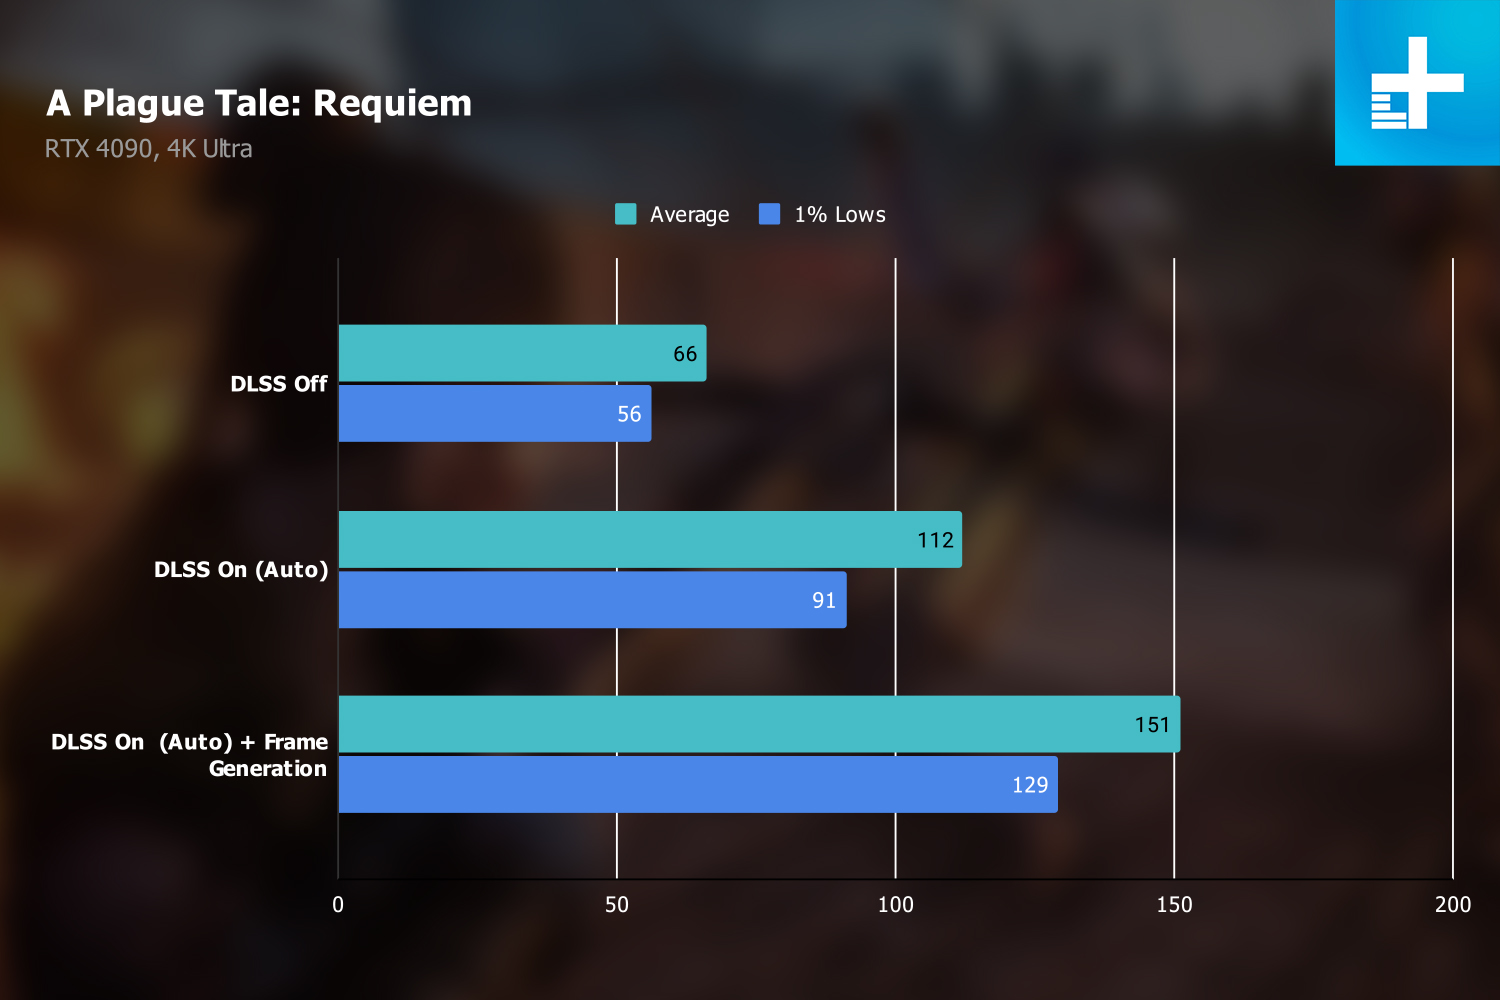 DLSS 3 performance in A Plague Tale Requiem with the RTX 4090.